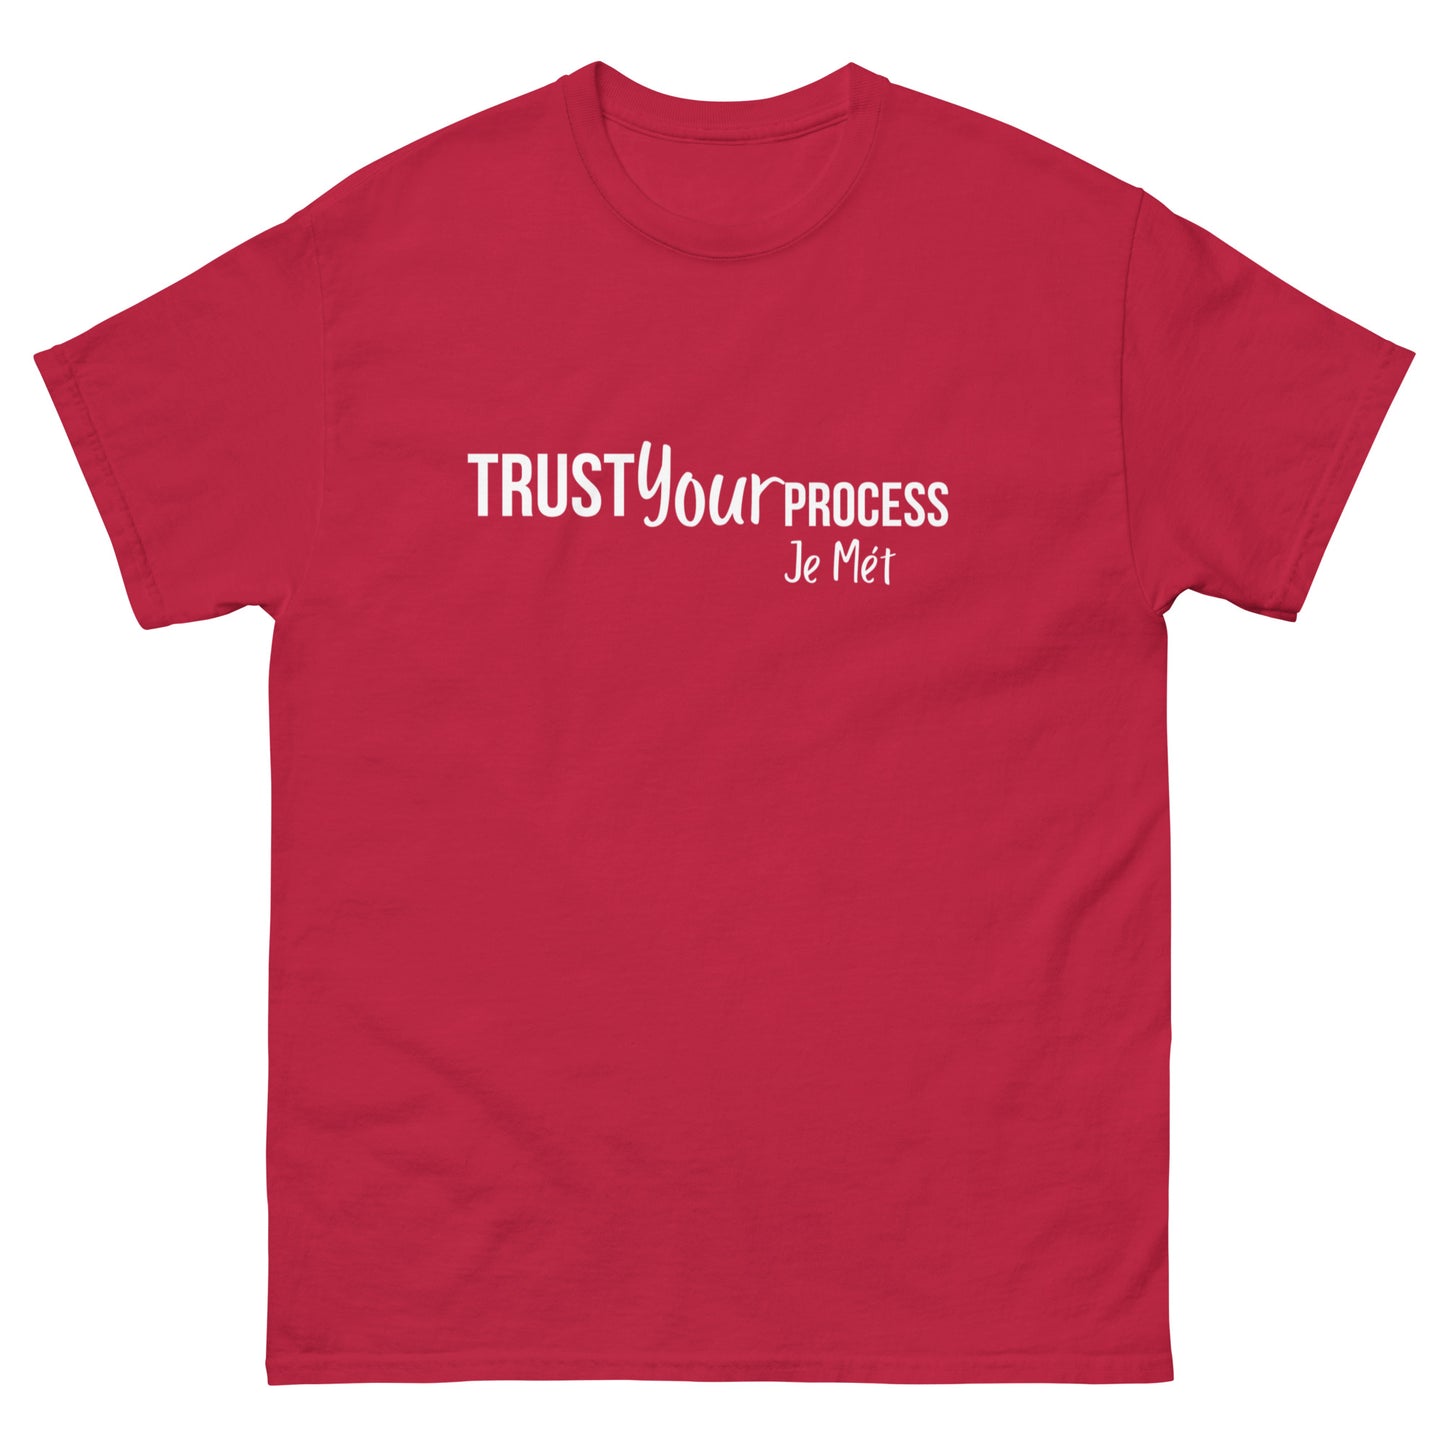 Trust your Process tee